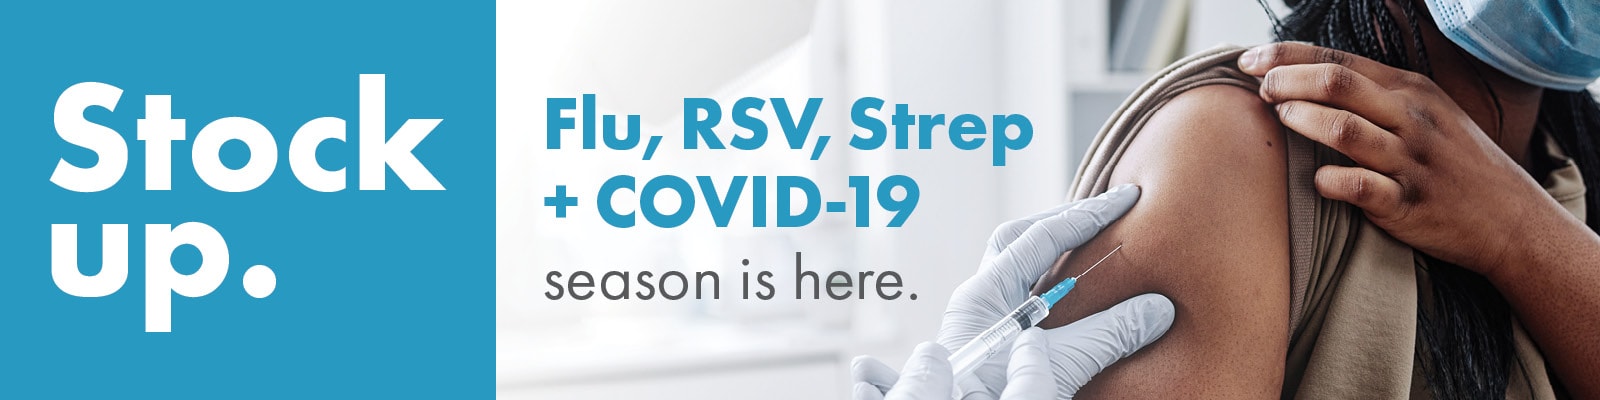 Flu, RSV, COVID-19, and Strep season is here!